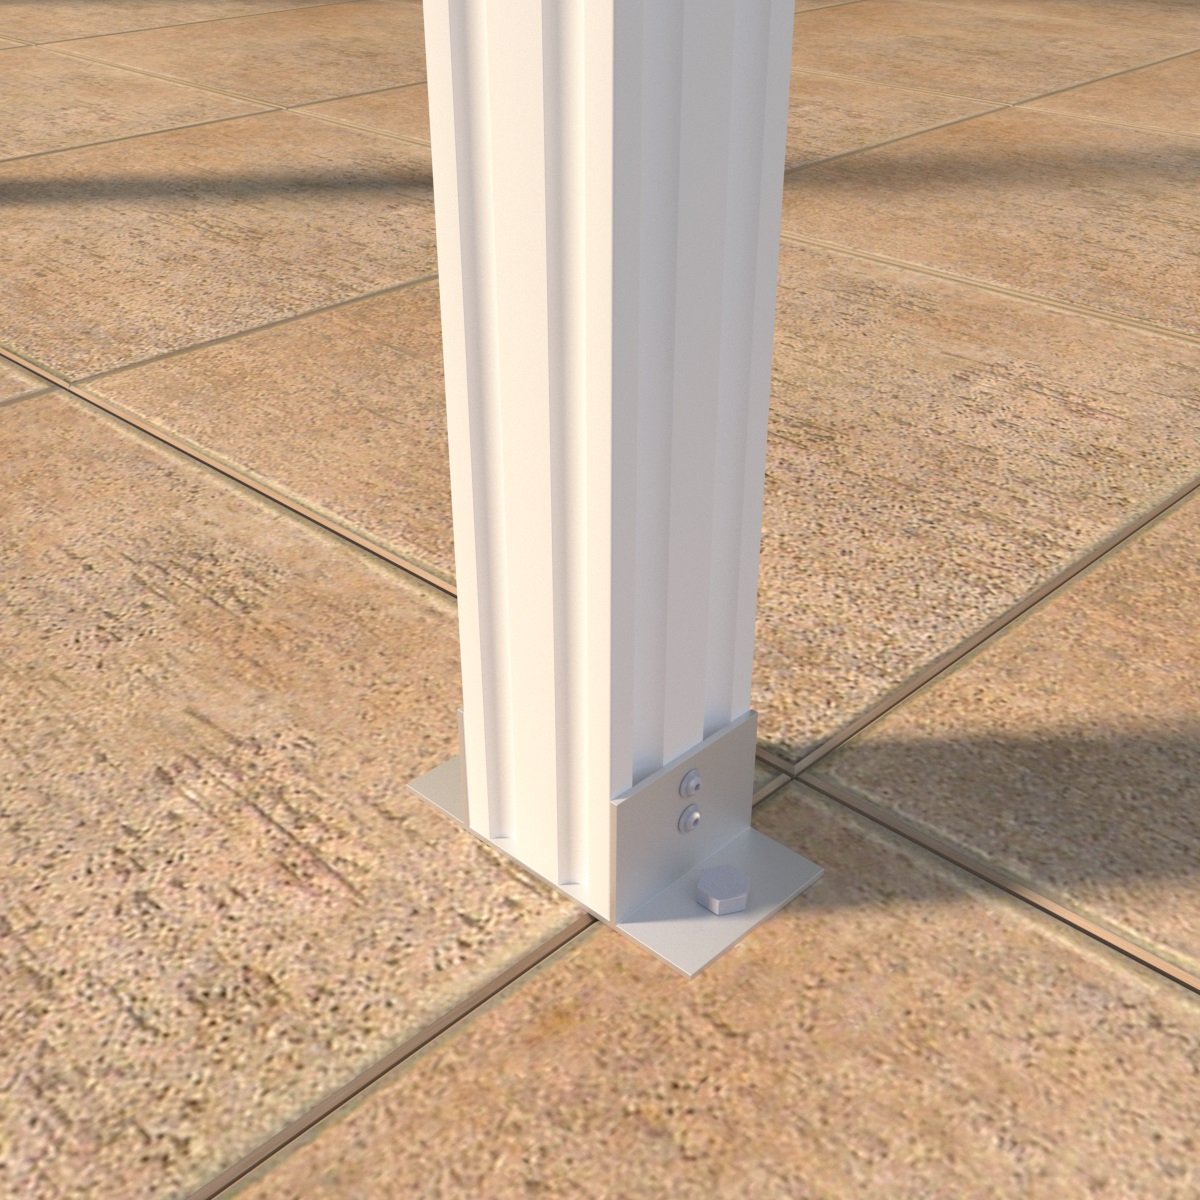 10 ft. Deep x 16 ft. Wide White Attached Aluminum Patio Cover -3 Posts - (10lb Low Snow Area)